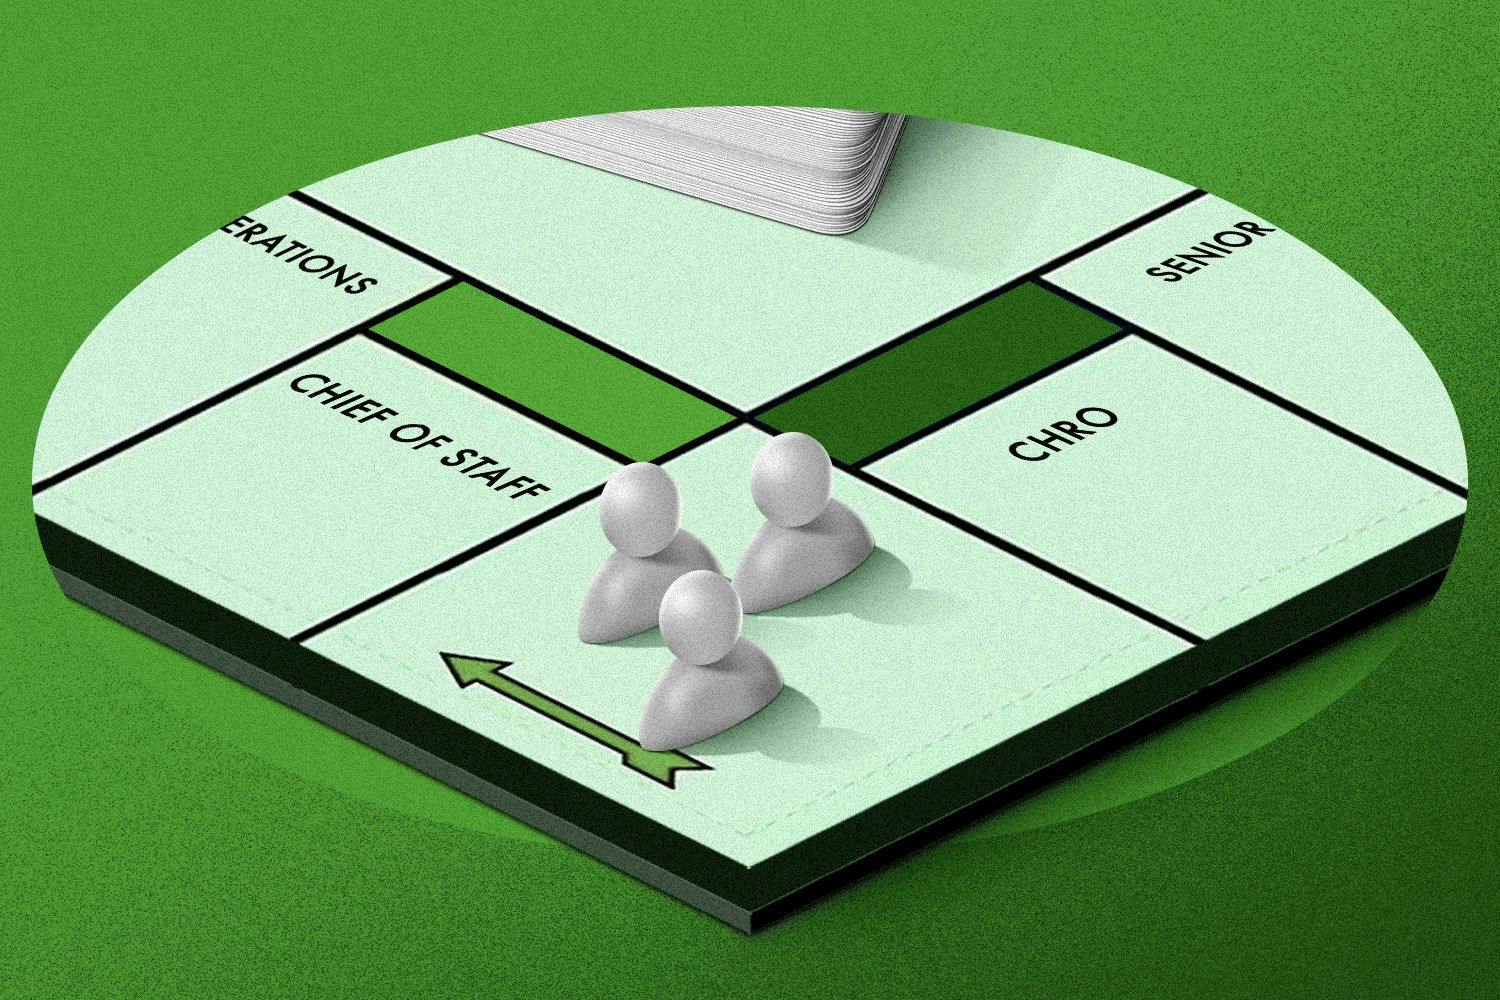 a green monopoly board with little people as pieces, moving to spots like "chief of staff" and "CHRO"